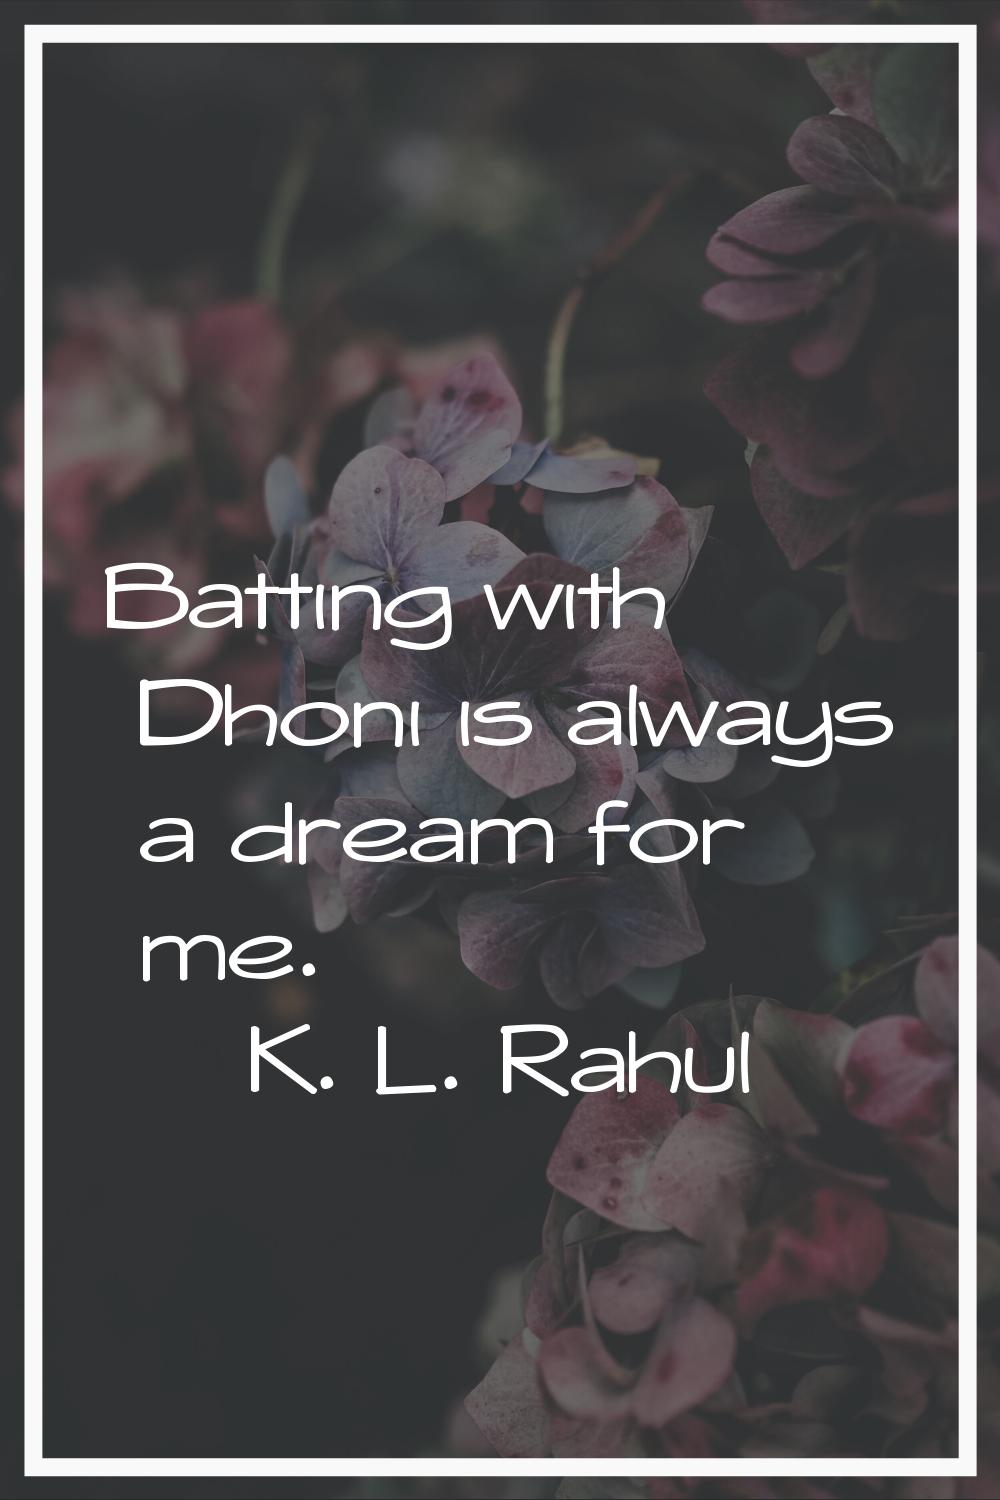 Batting with Dhoni is always a dream for me.